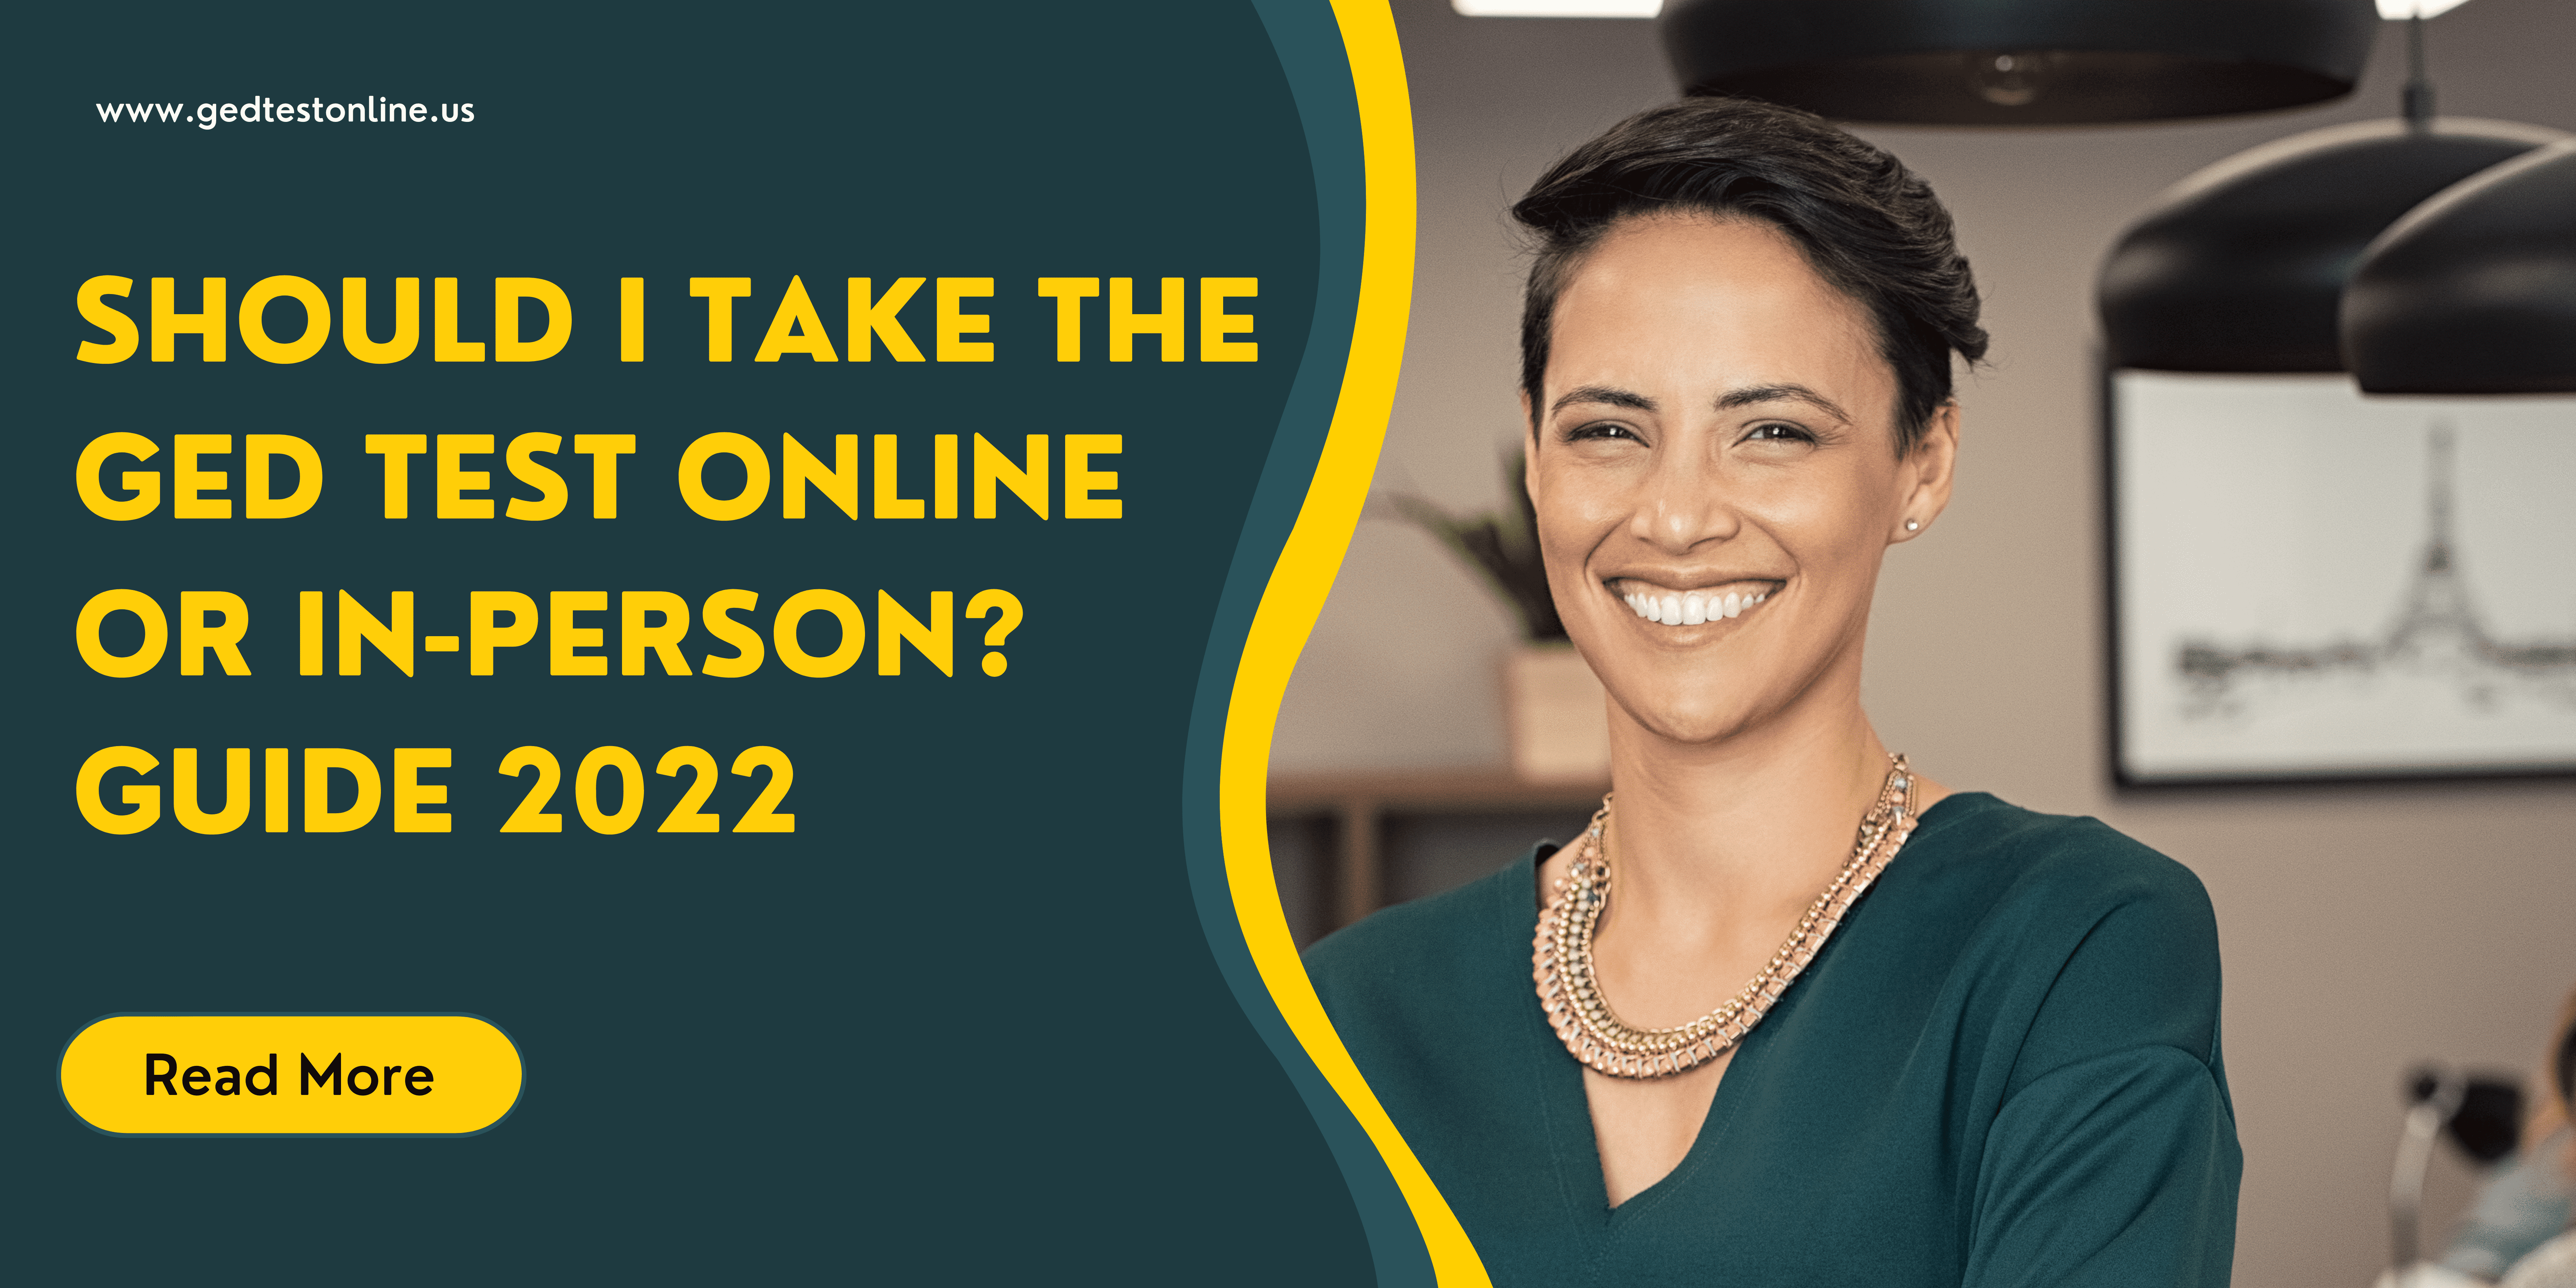 GED Test: Online or In-Person? Making the Right Choice